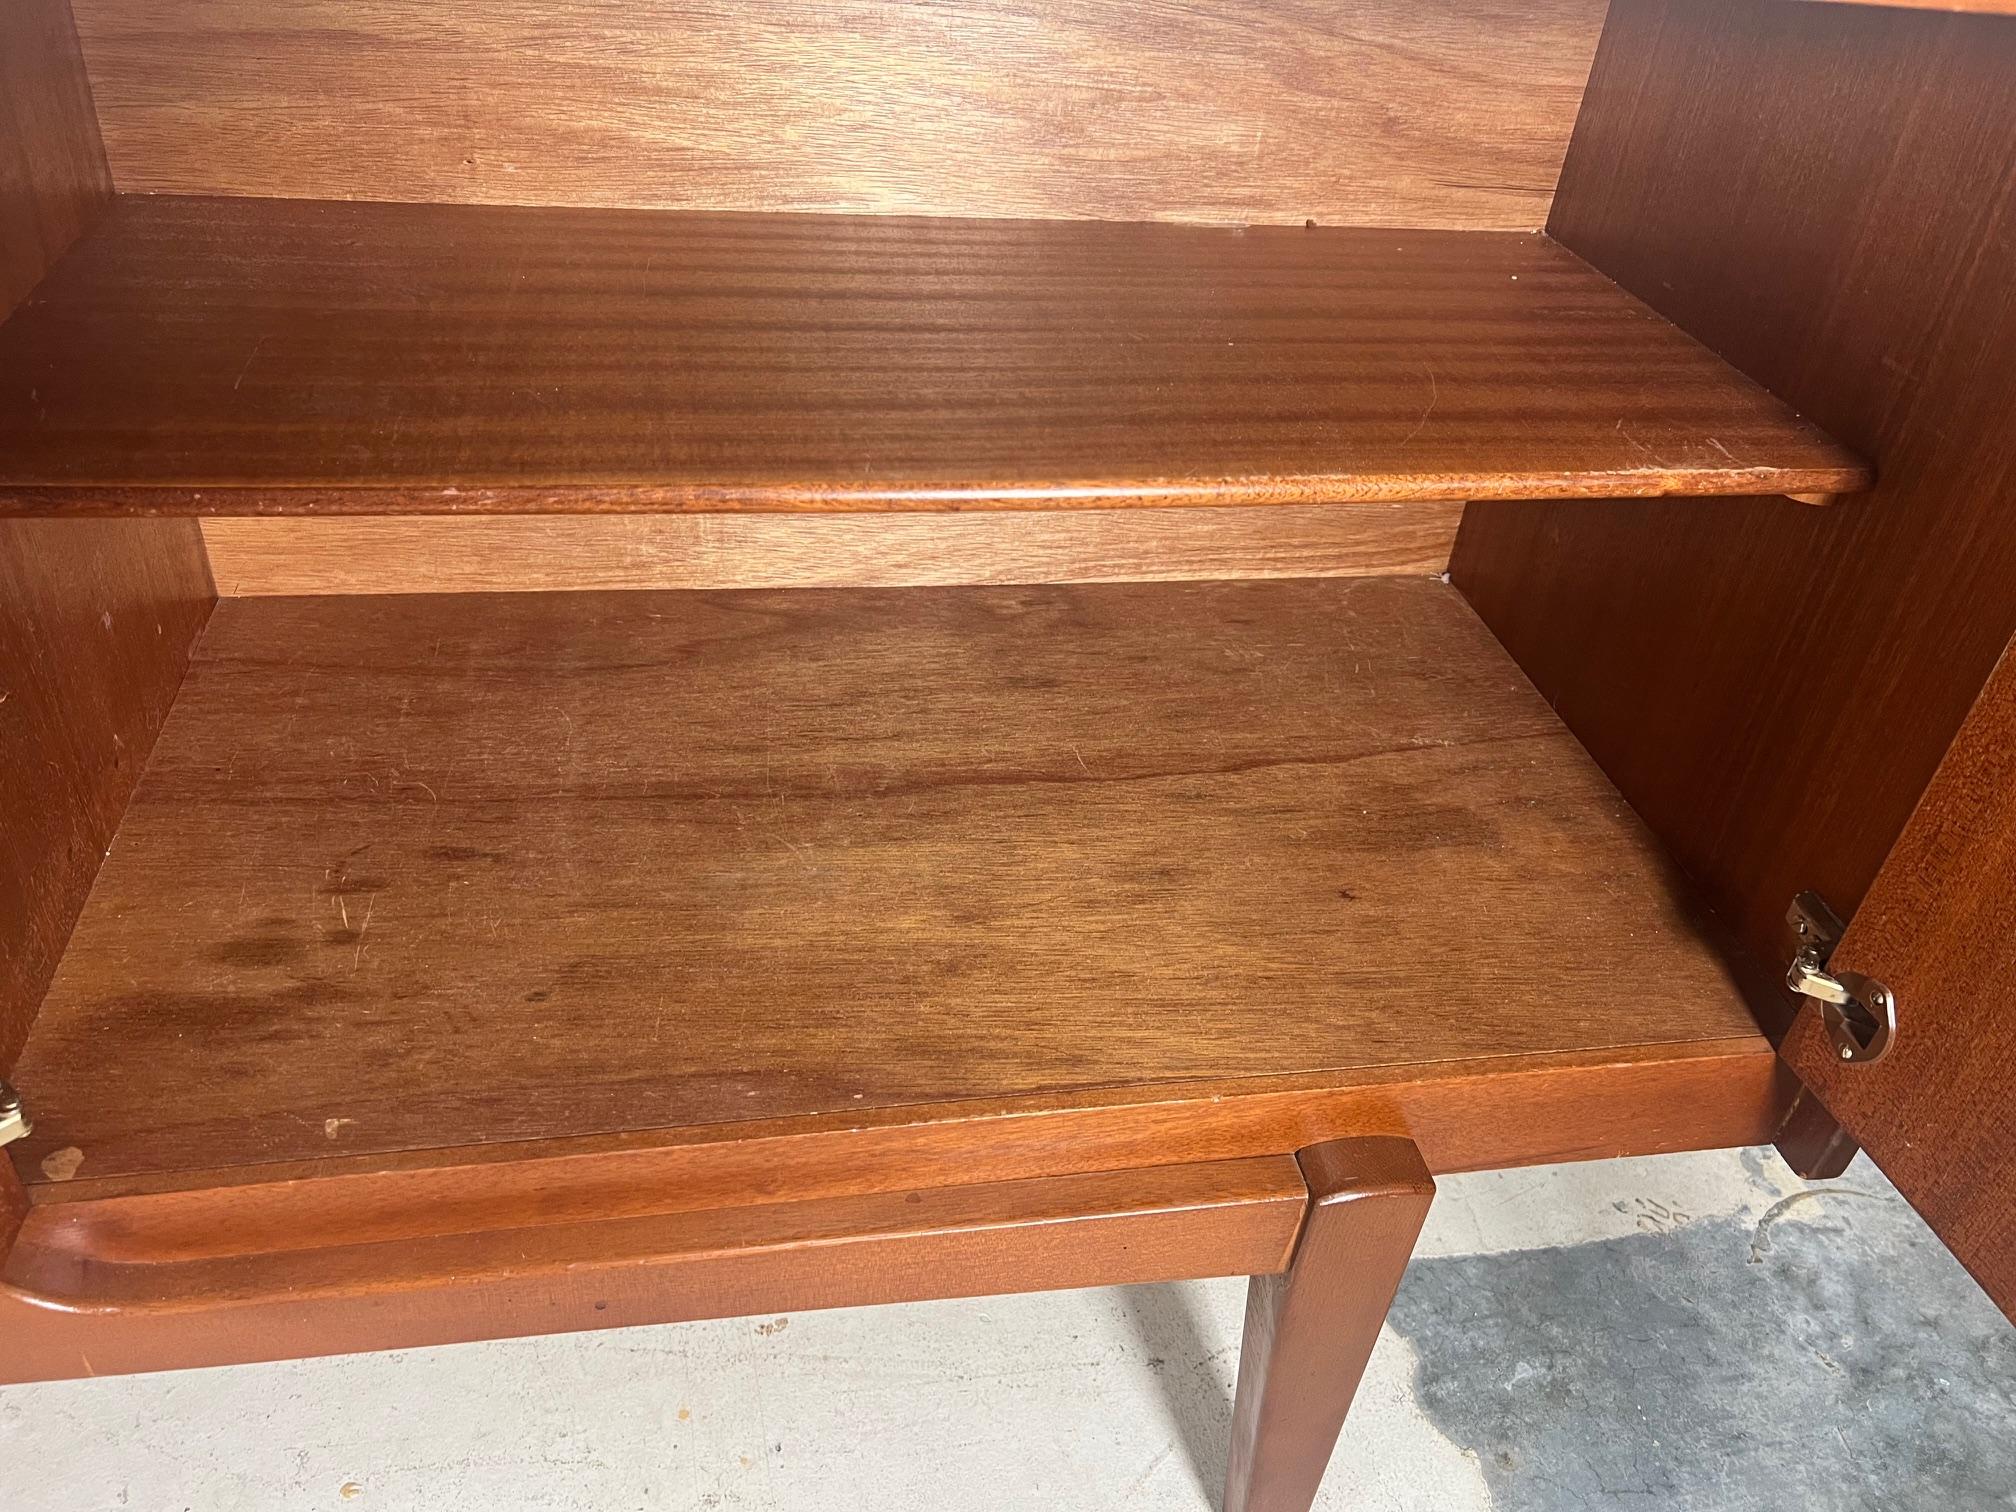 European Mid Century Modern Teak Credenza By Jentique Made In England For Sale